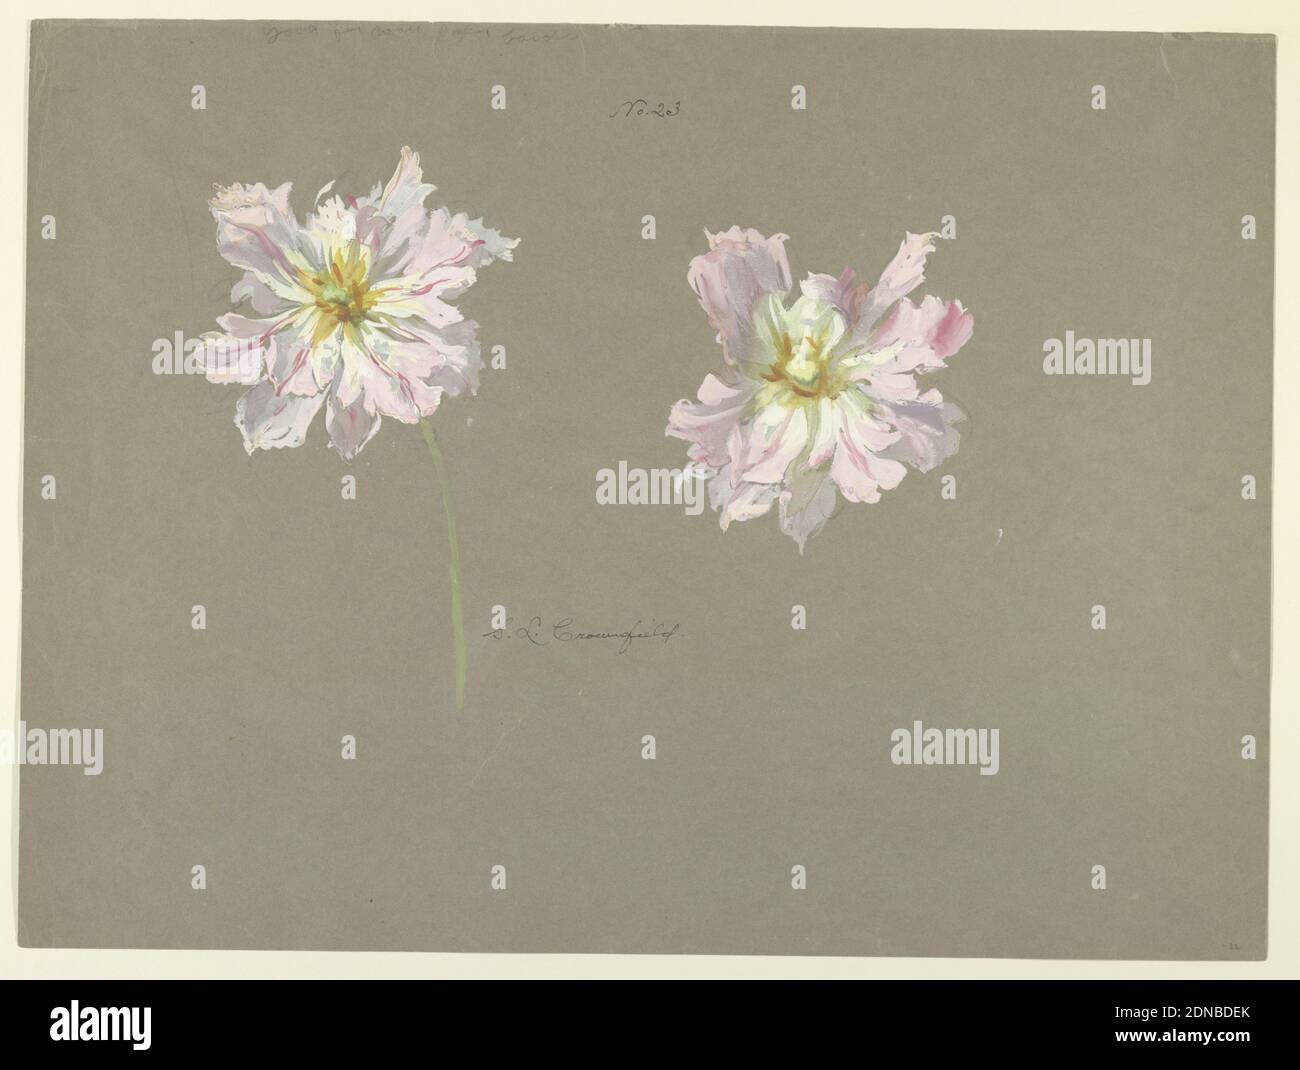 Study of Pale Pink Peonies, Sophia L. Crownfield, (American, 1862–1929), Brush and watercolor, graphite on gray paper, Horizontal sheet depicting two peony blossoms in pink. Left blossom is depicted with a green stem., USA, early 20th century, nature studies, Drawing Stock Photo